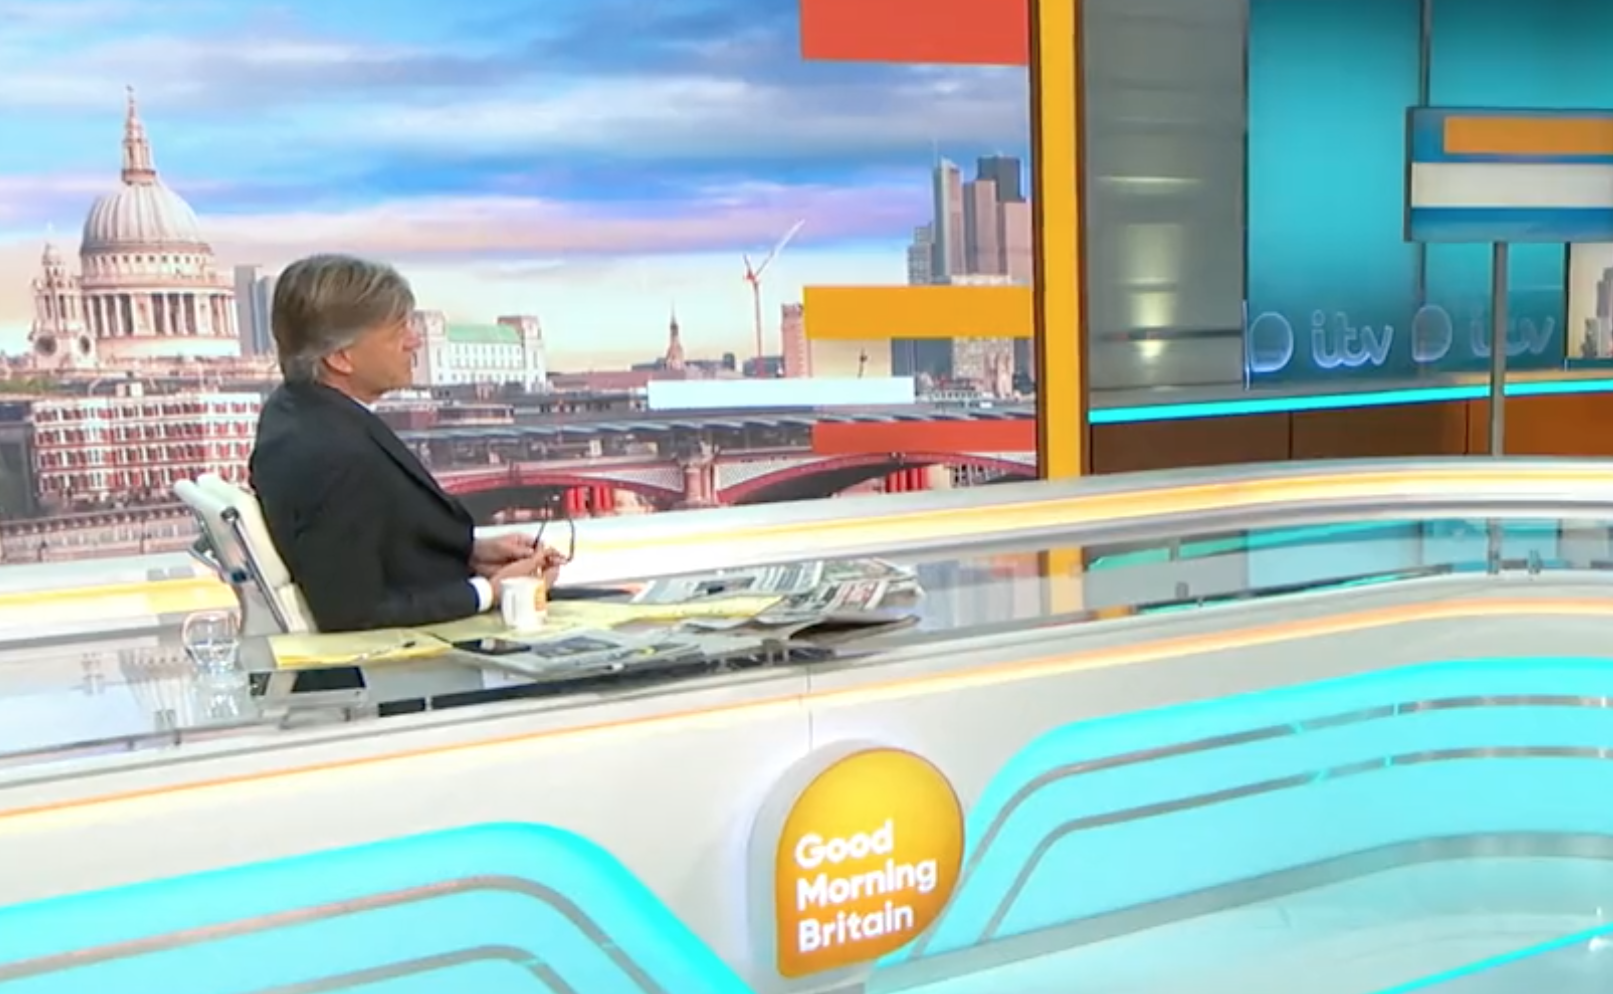 Richard Madeley returns to Good Morning Britain ALONE in massive show shake-up